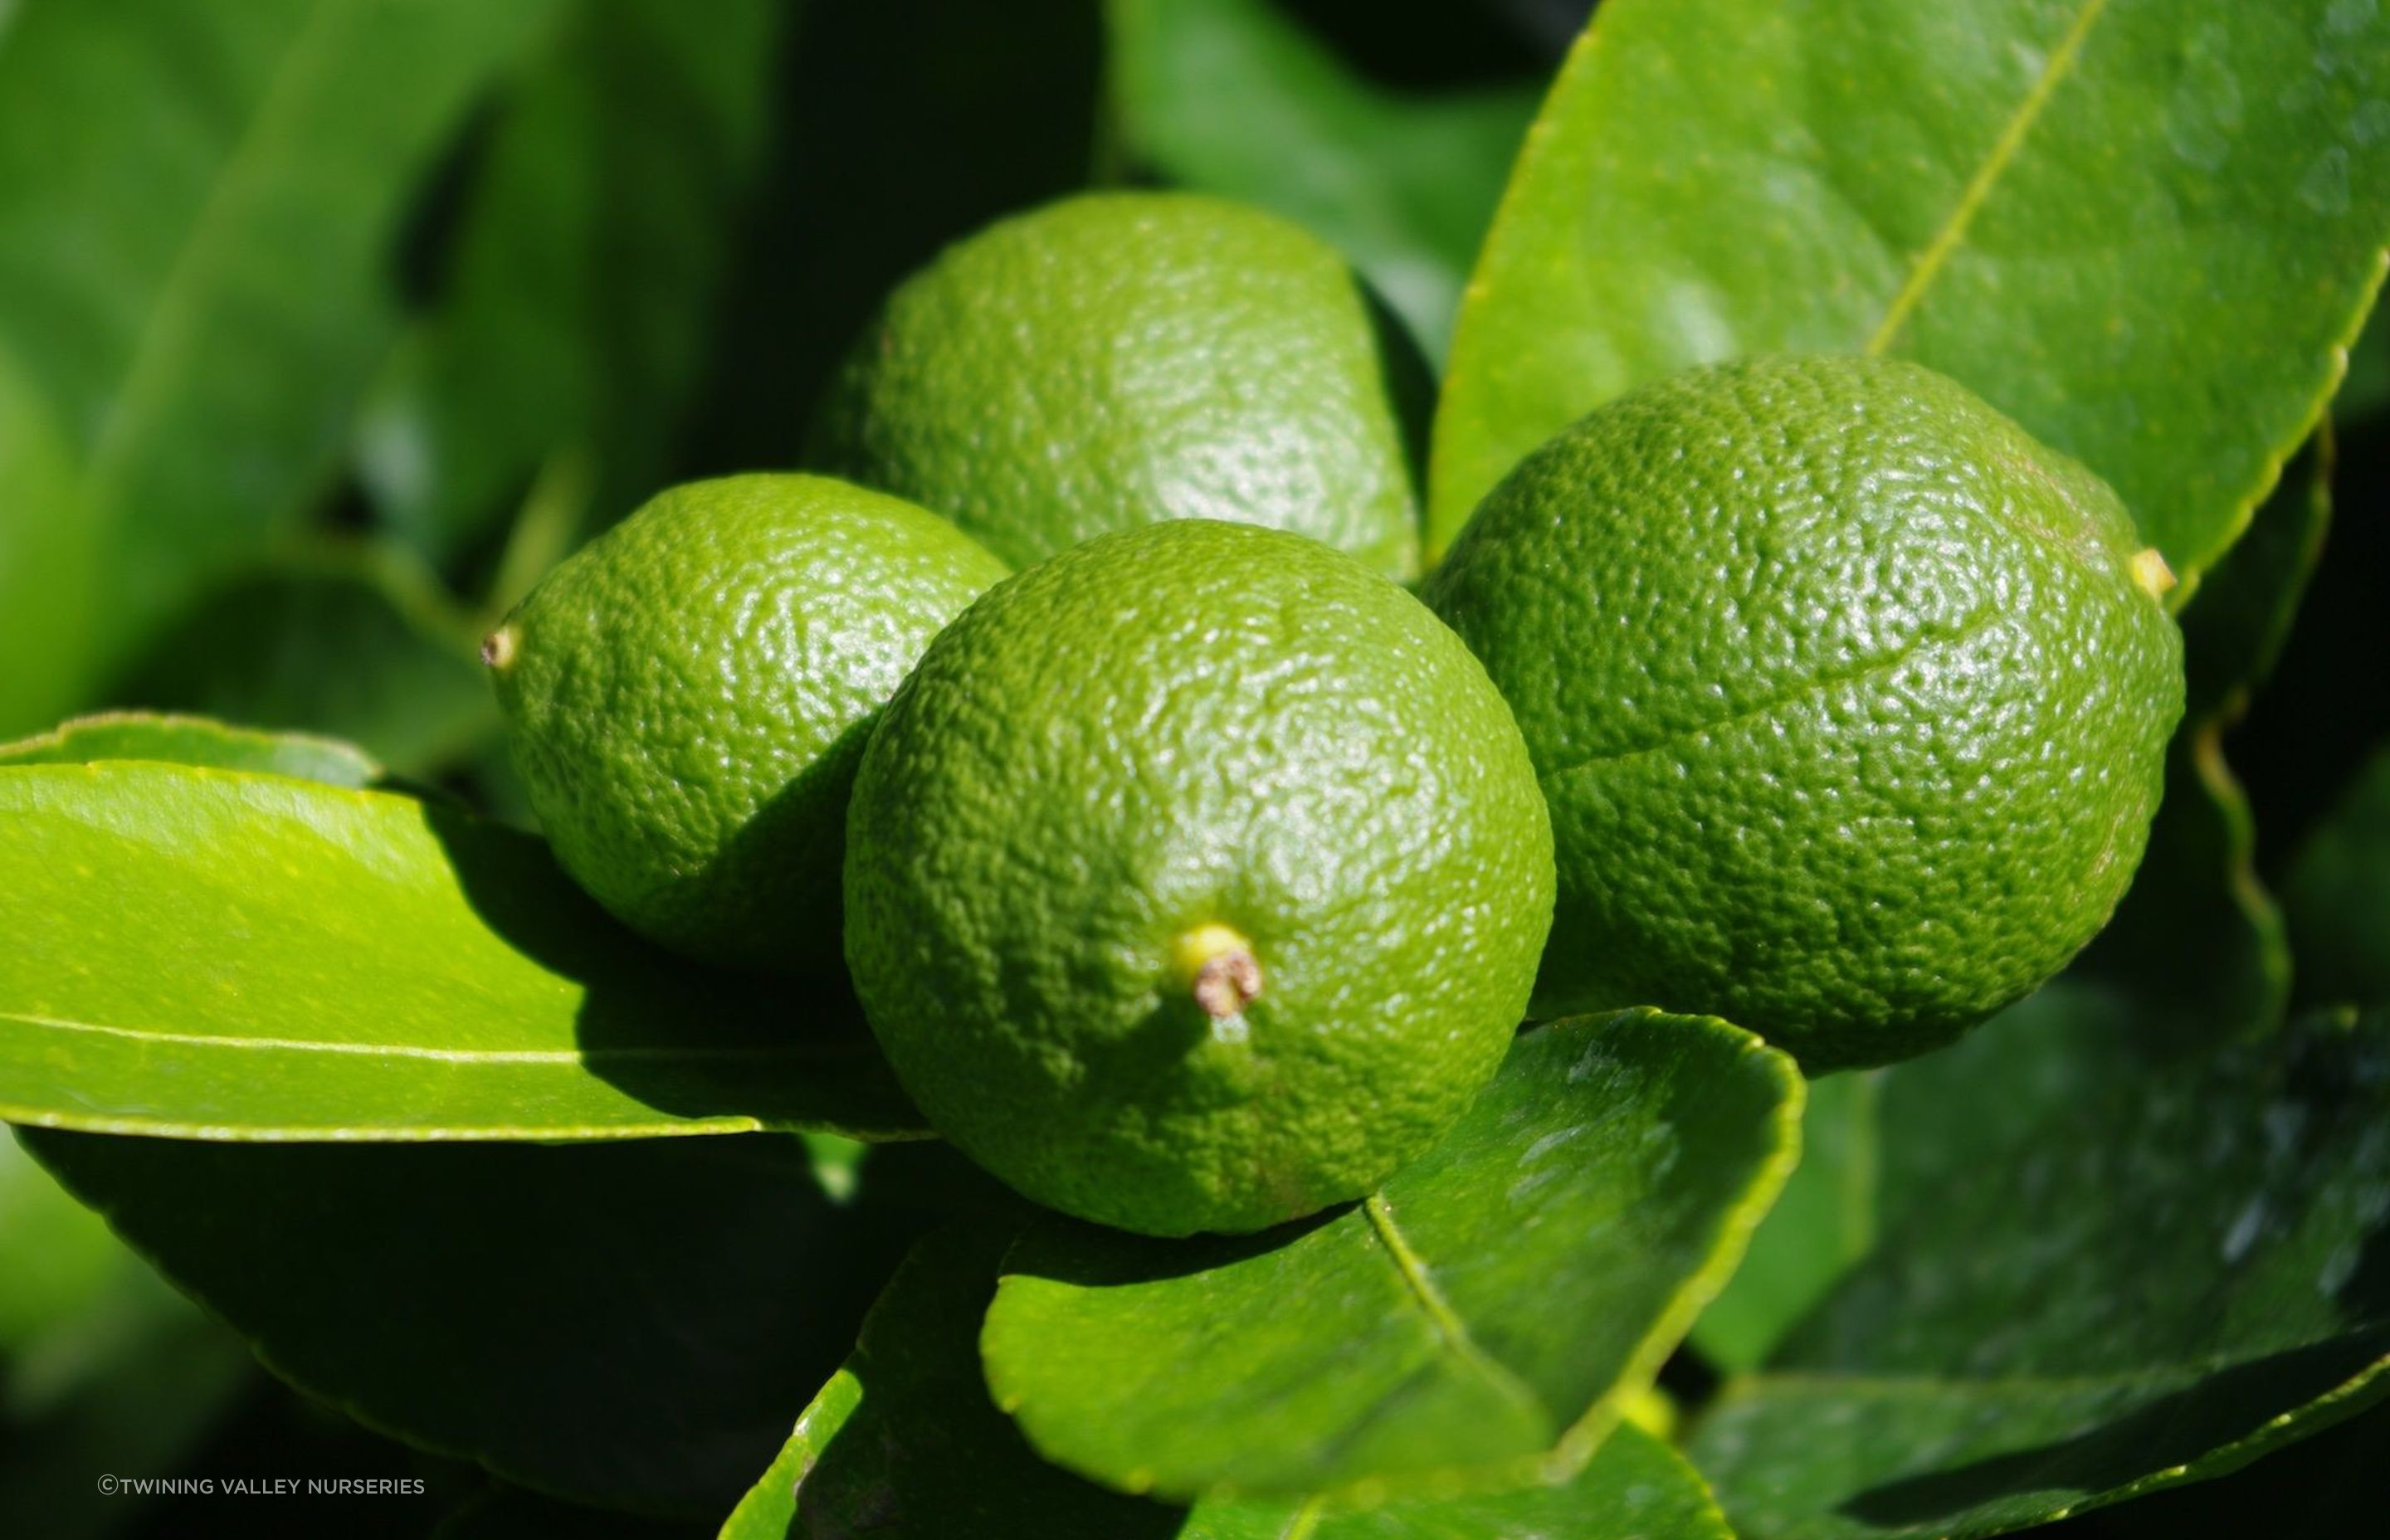 The Citrus 'Tahitian Lime' will help bring your favourite dishes and drinks to life.